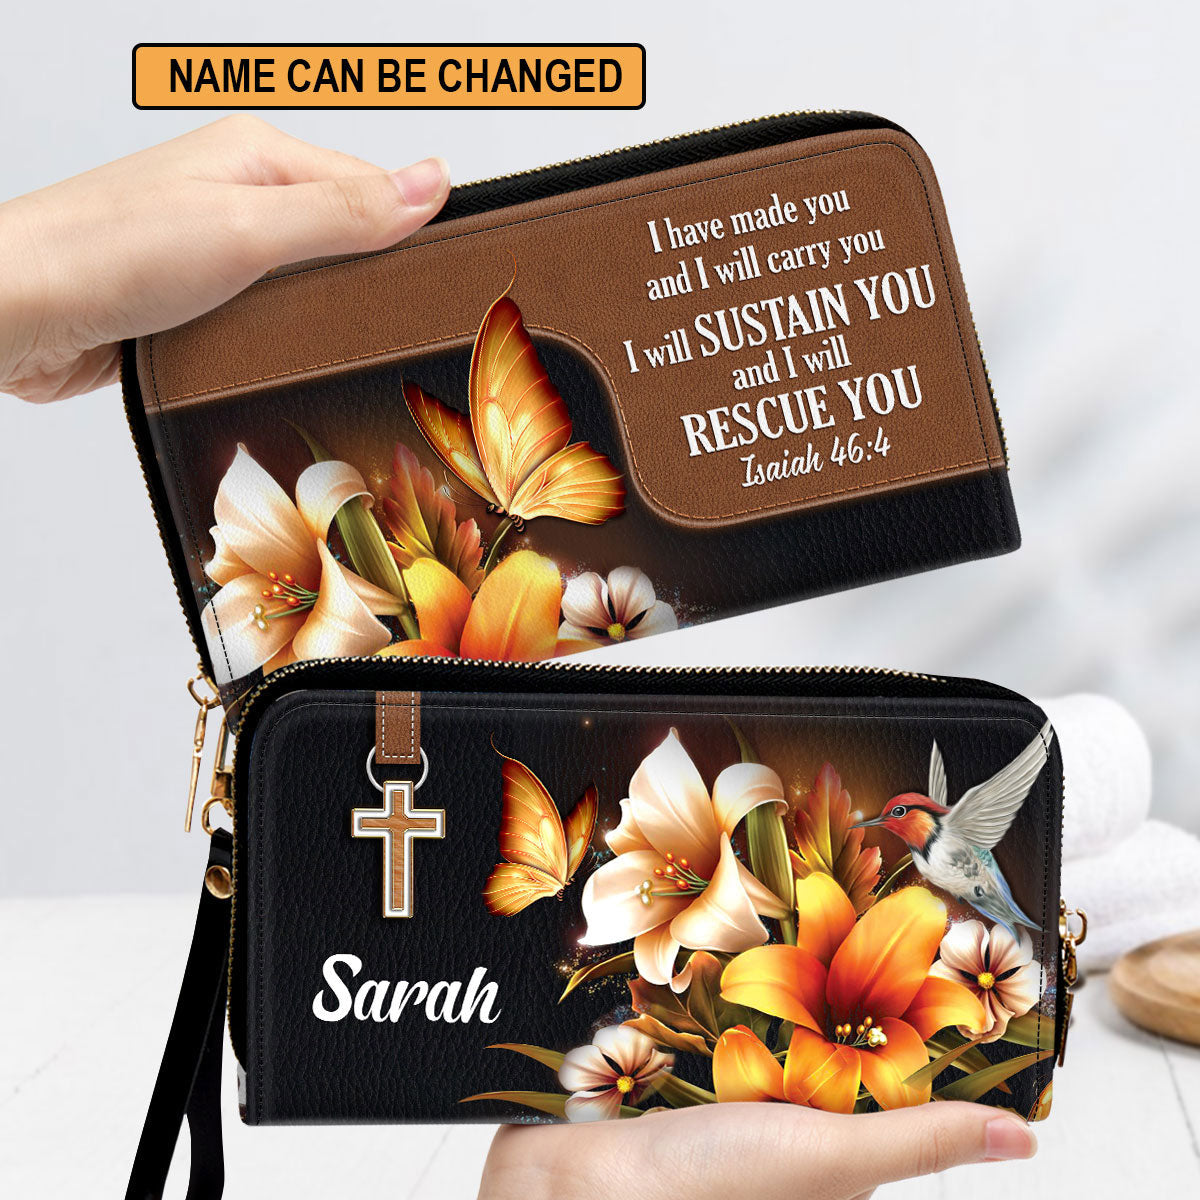 Women Clutch Purse - Isaiah 464 I Will Sustain You And I Will Rescue You - Personalized Lily Leather Clutch Purse - Faith Gifts From God For Christ Women